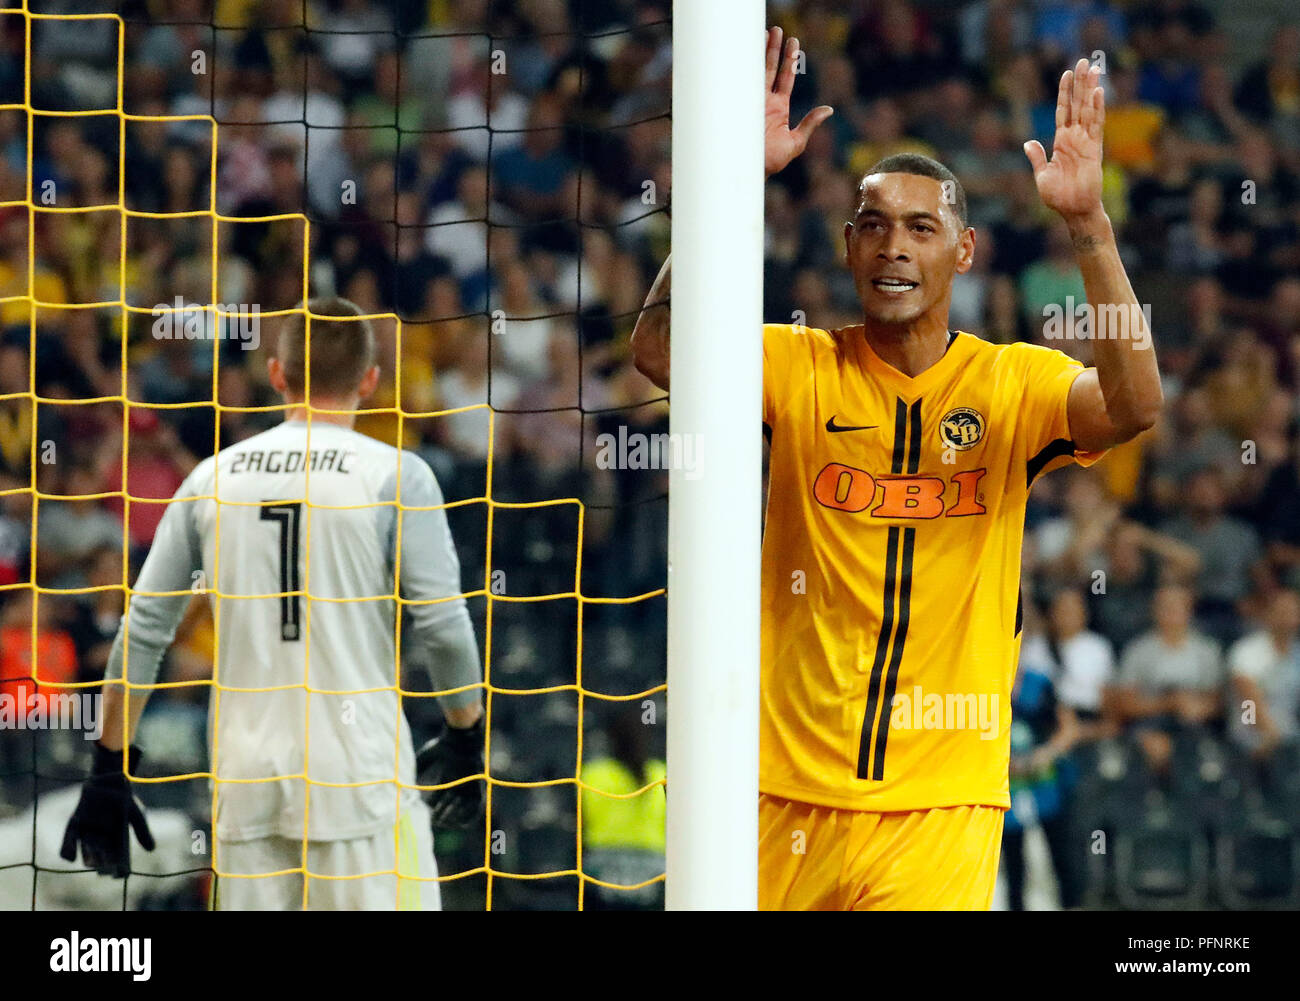 Bern, Switzerland. 22nd Aug, 2018. Guillaume Hoarau (R) of Young Boys  gestures during the first leg match of UEFA Champions League play-offs  between Young Boys and Dinamo Zagreb at the Stade de